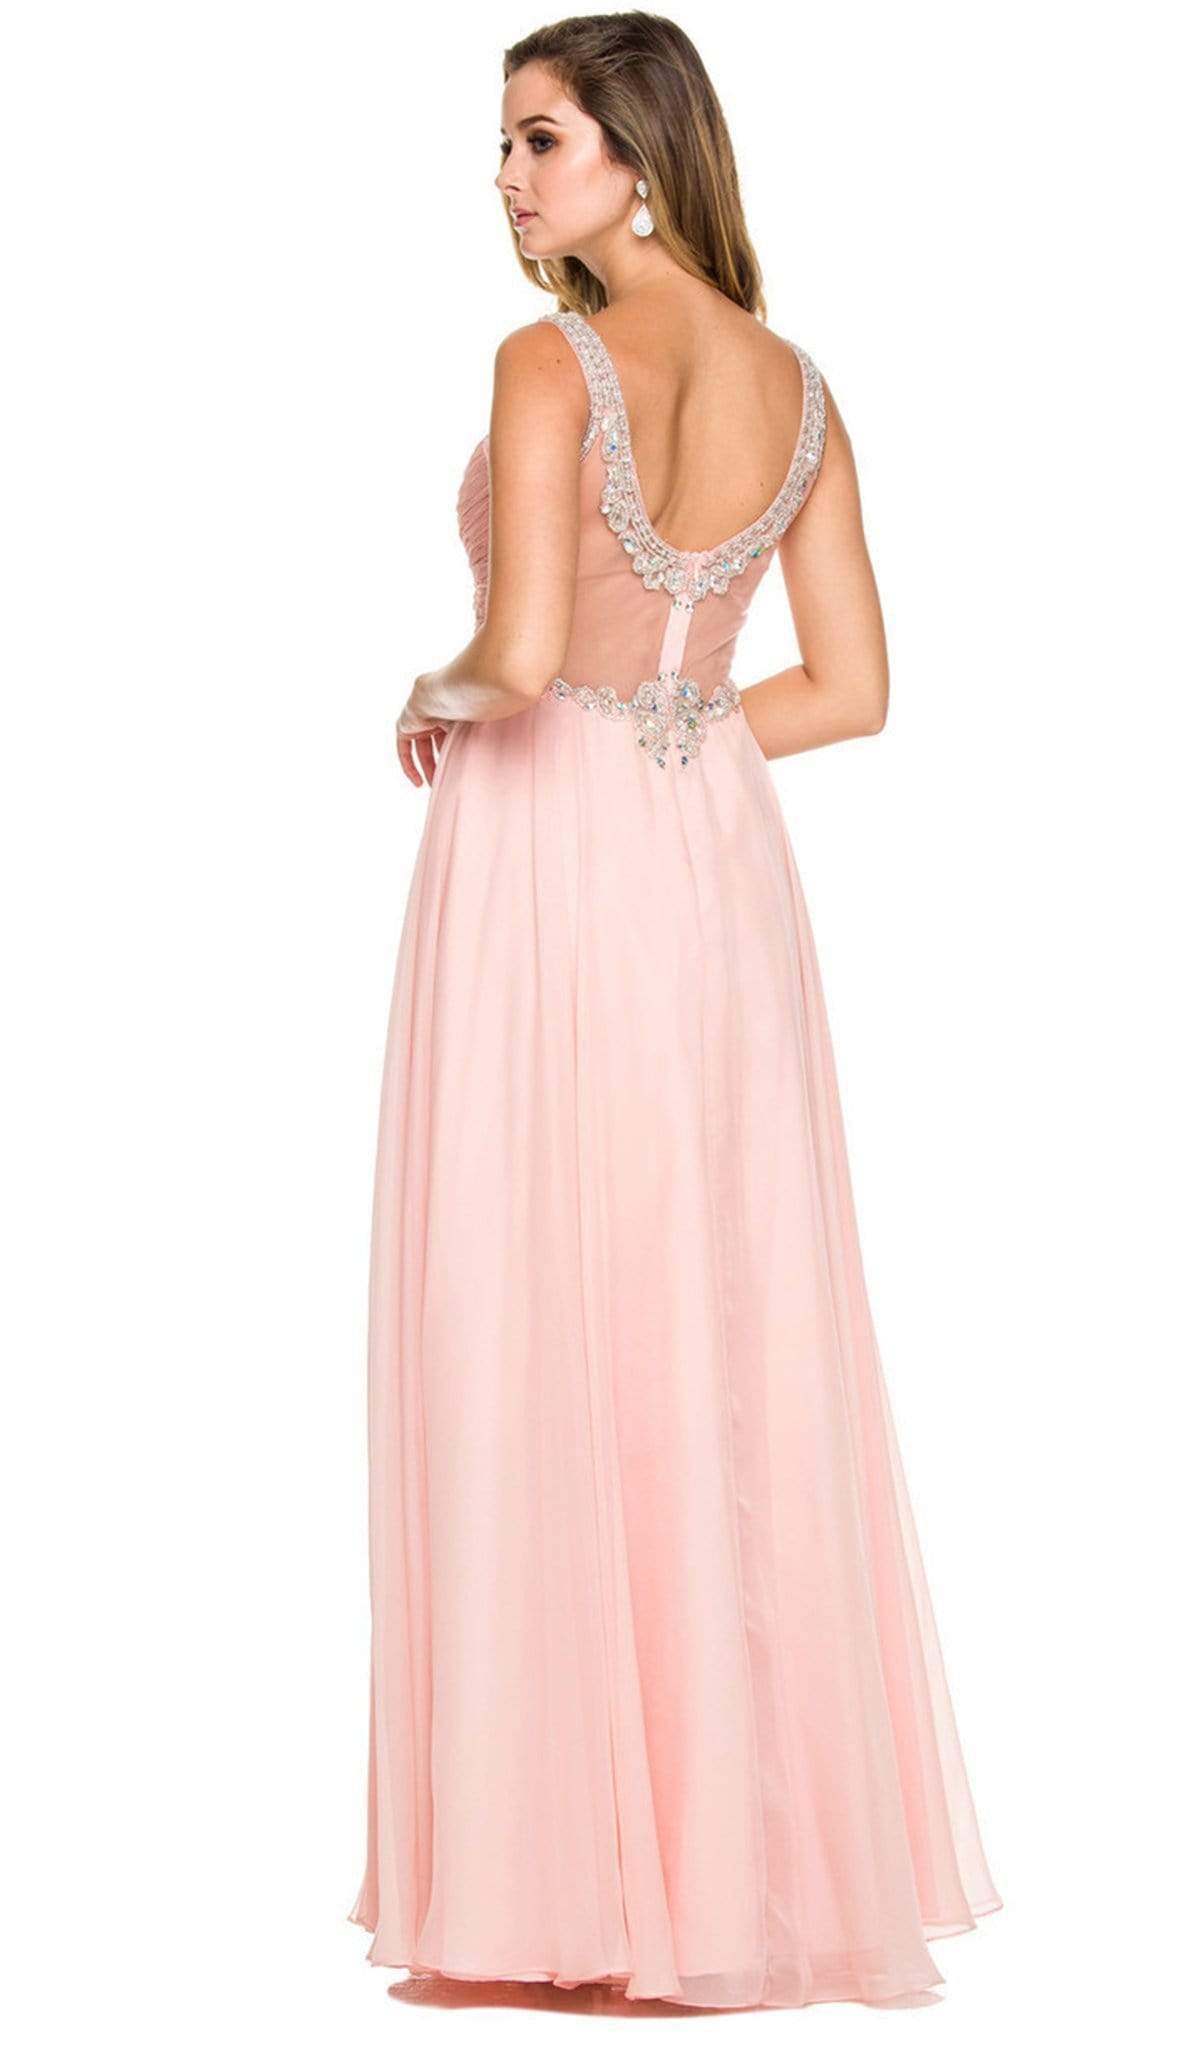 Nox Anabel - 8155 Bateau illusion Chiffon Gown Special Occasion Dress